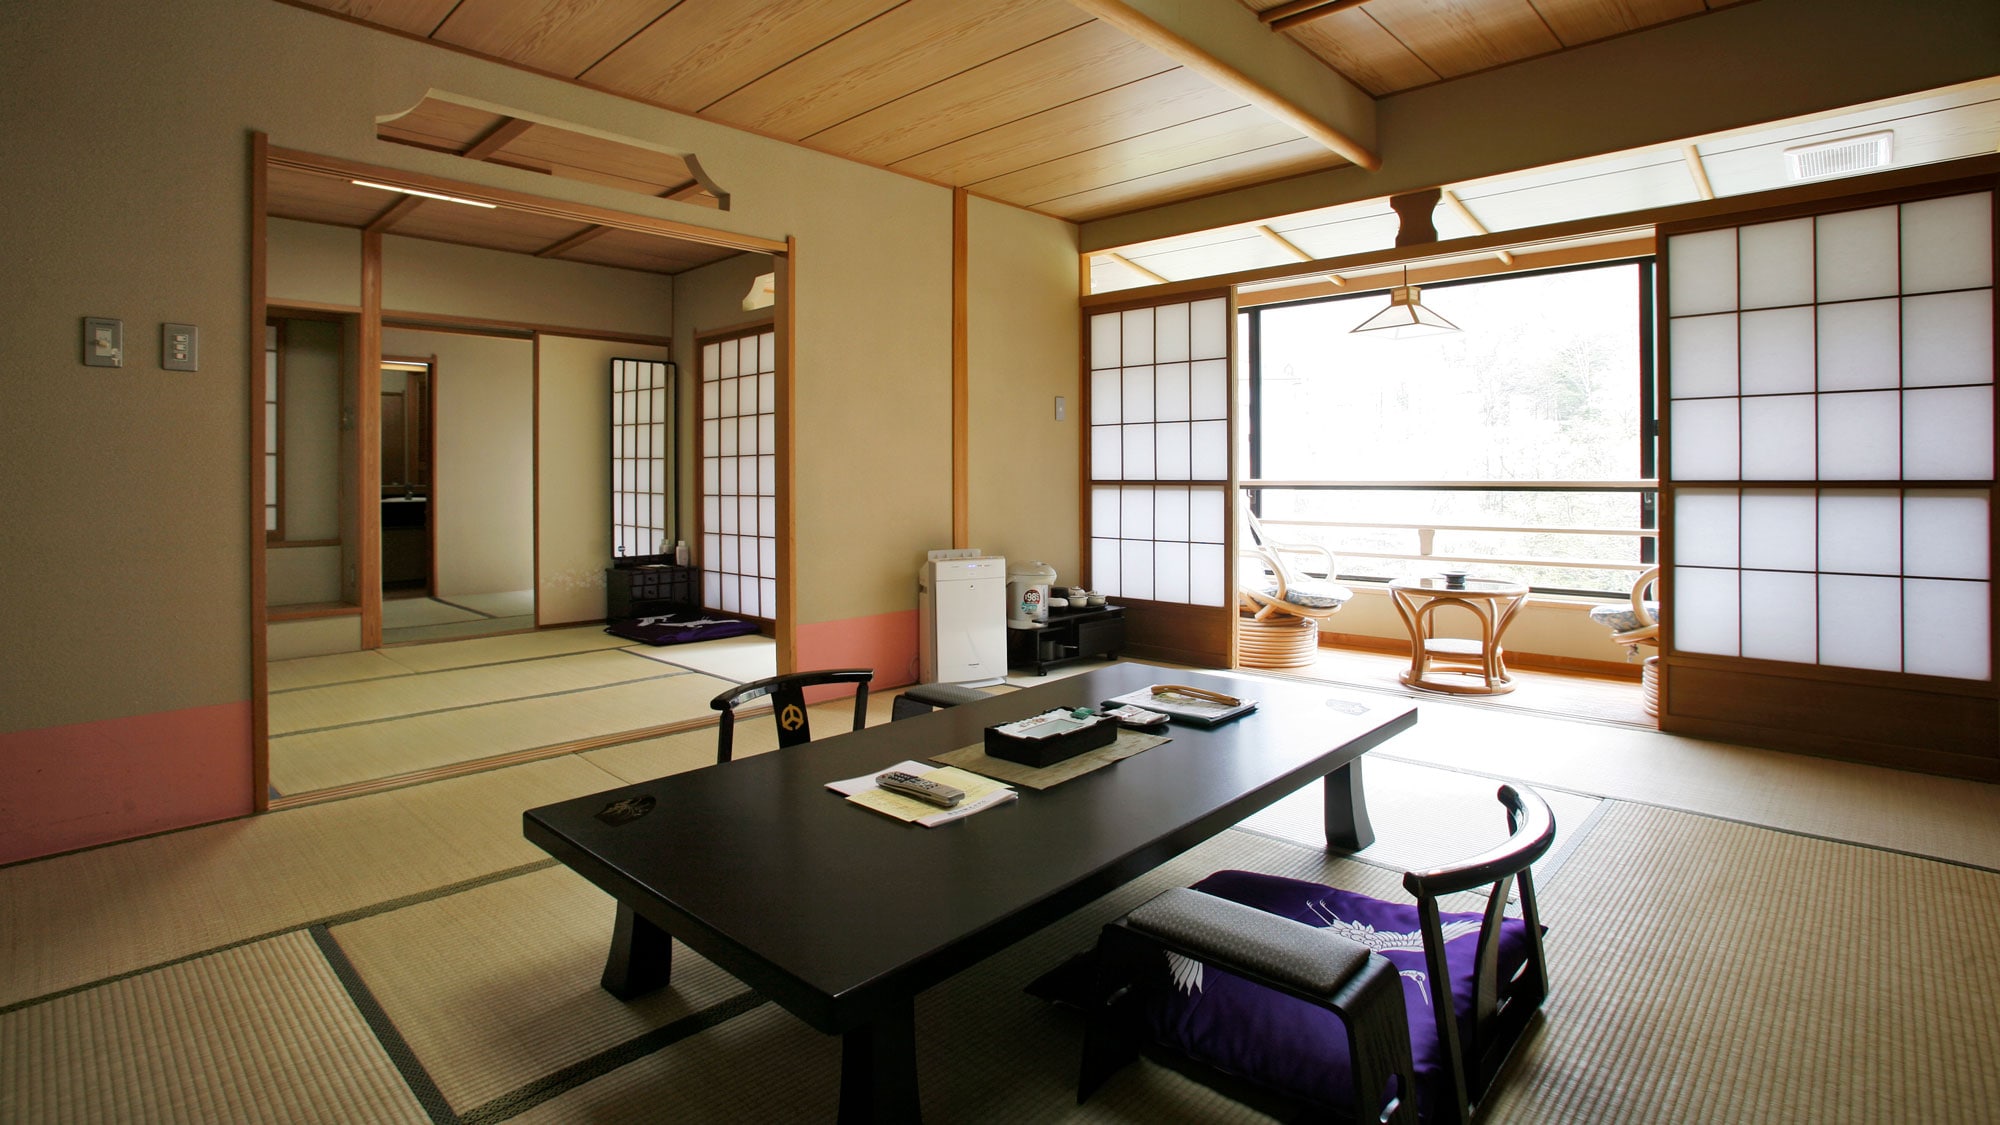 Hotel information and reservations for Sounkyo Onsen Sounkyo Kanko